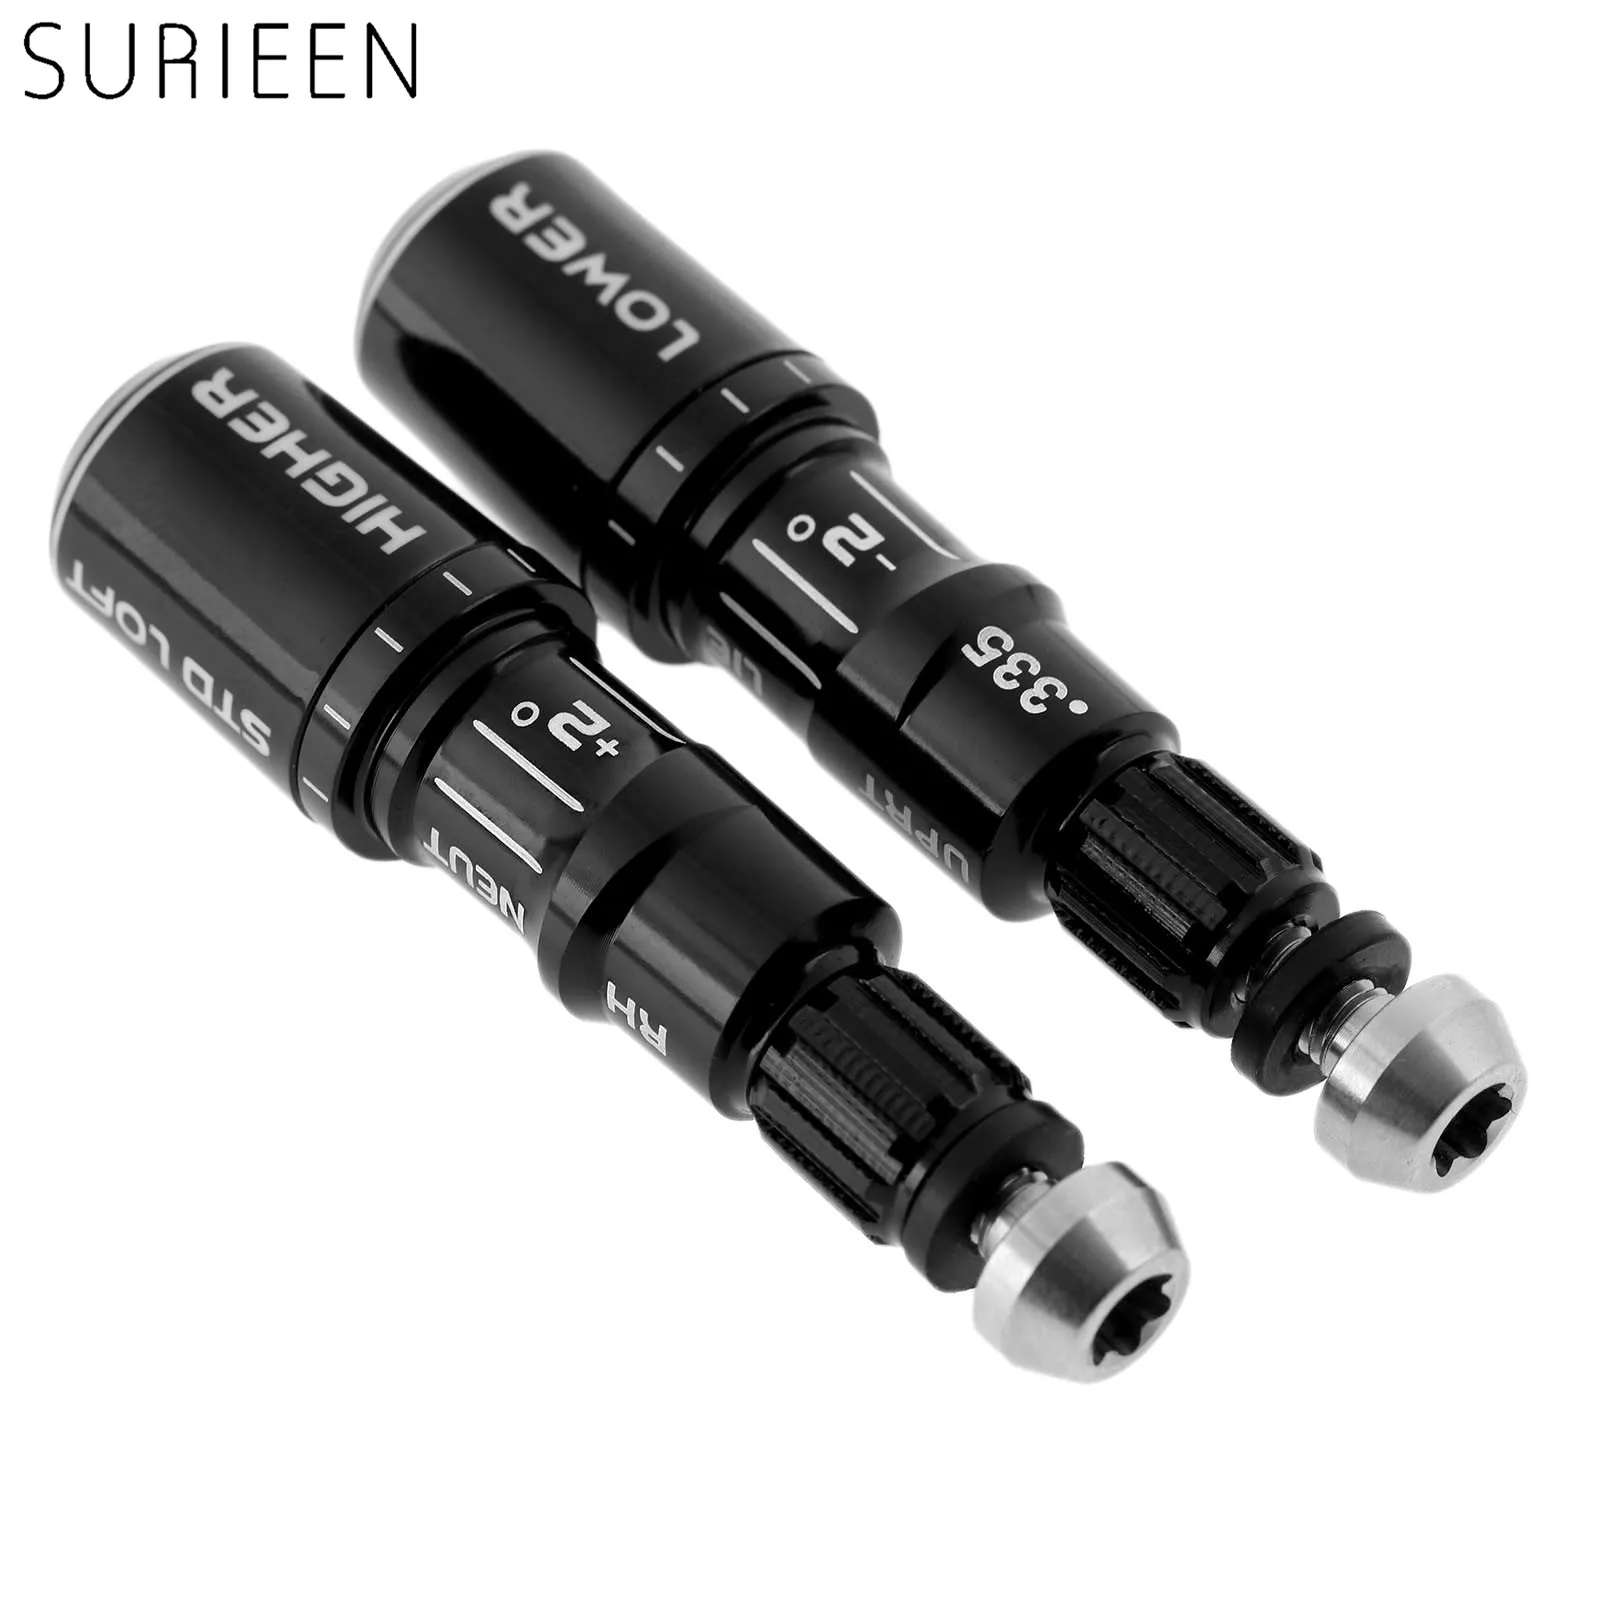 SURIEEN Tip Size .335 .350 +-2 Golf Shaft Loft Adapter Sleeve for TaylorMade M1 M2 Drivers and Fairway Woods Club Heads Replaces